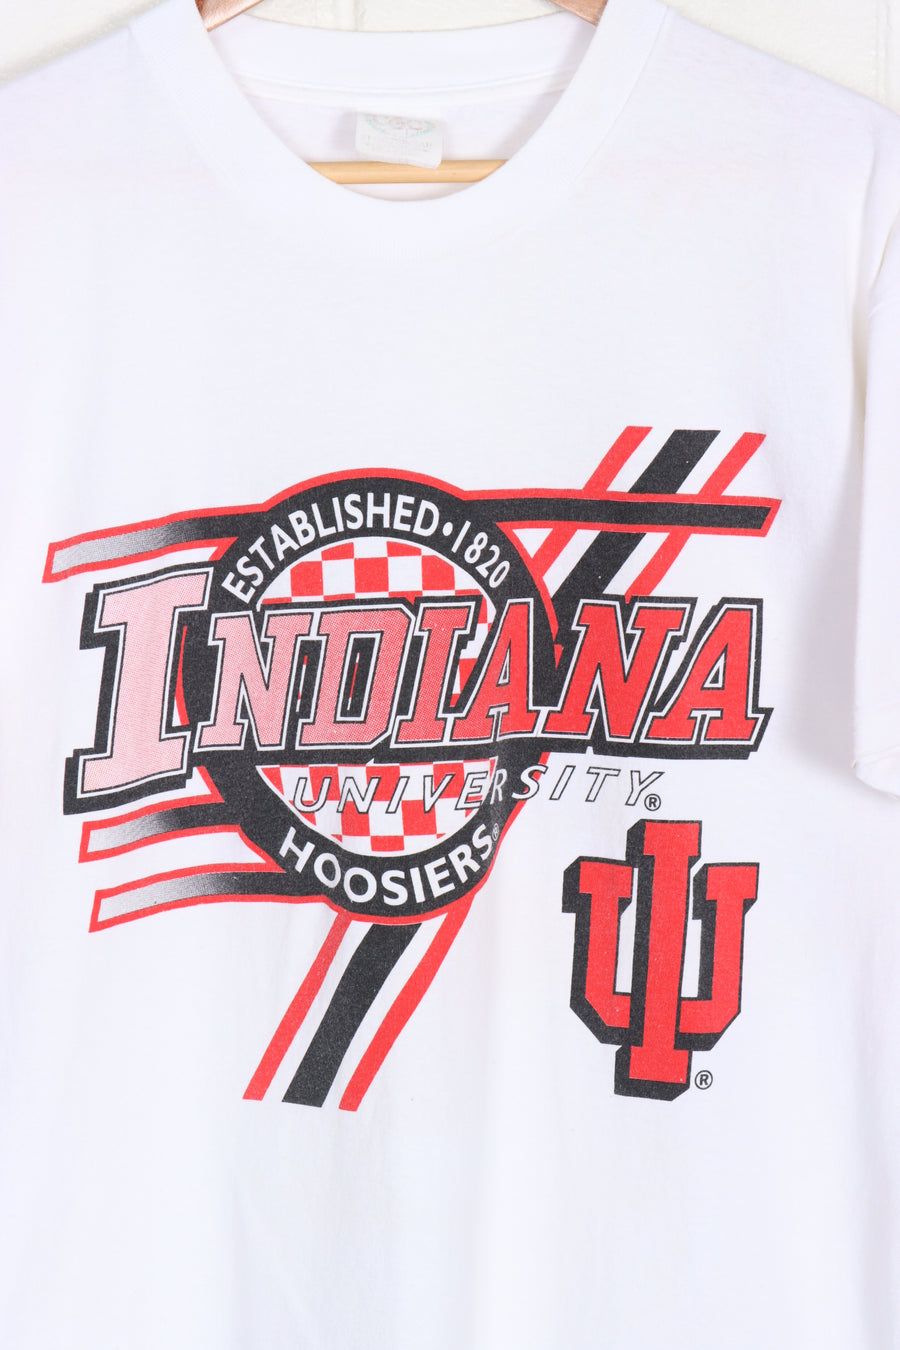 Hoosiers Indiana University College Red & Black Spell Out Tee (XL)